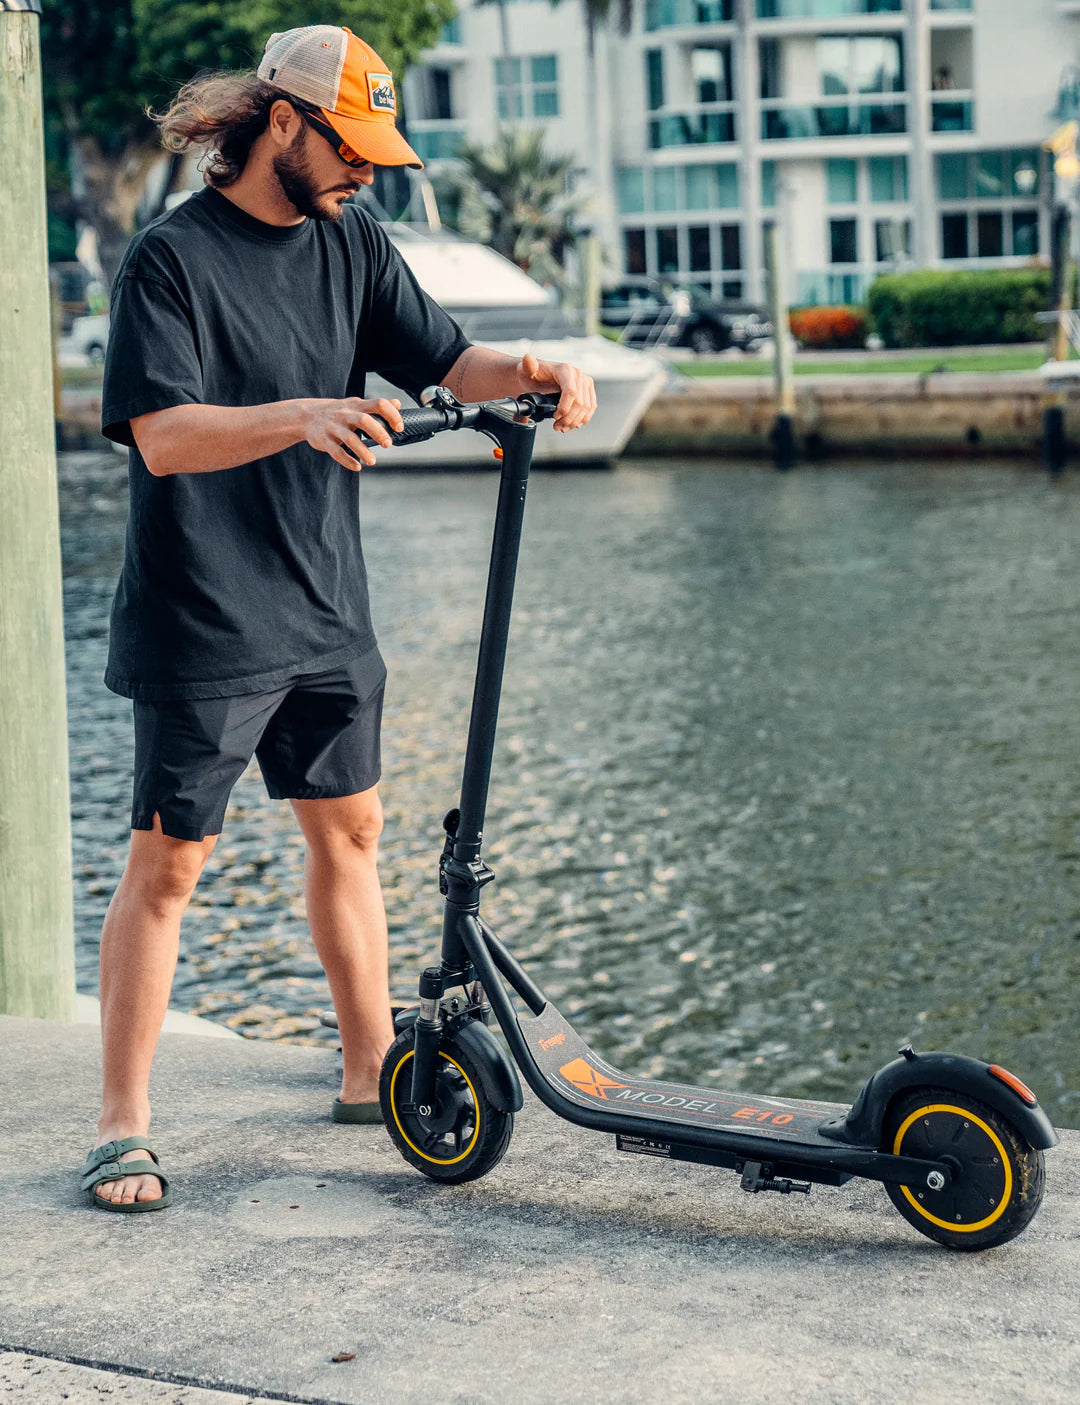 Freego E10 Pro 500W Powerful Electric Riding Scooter for City Commute